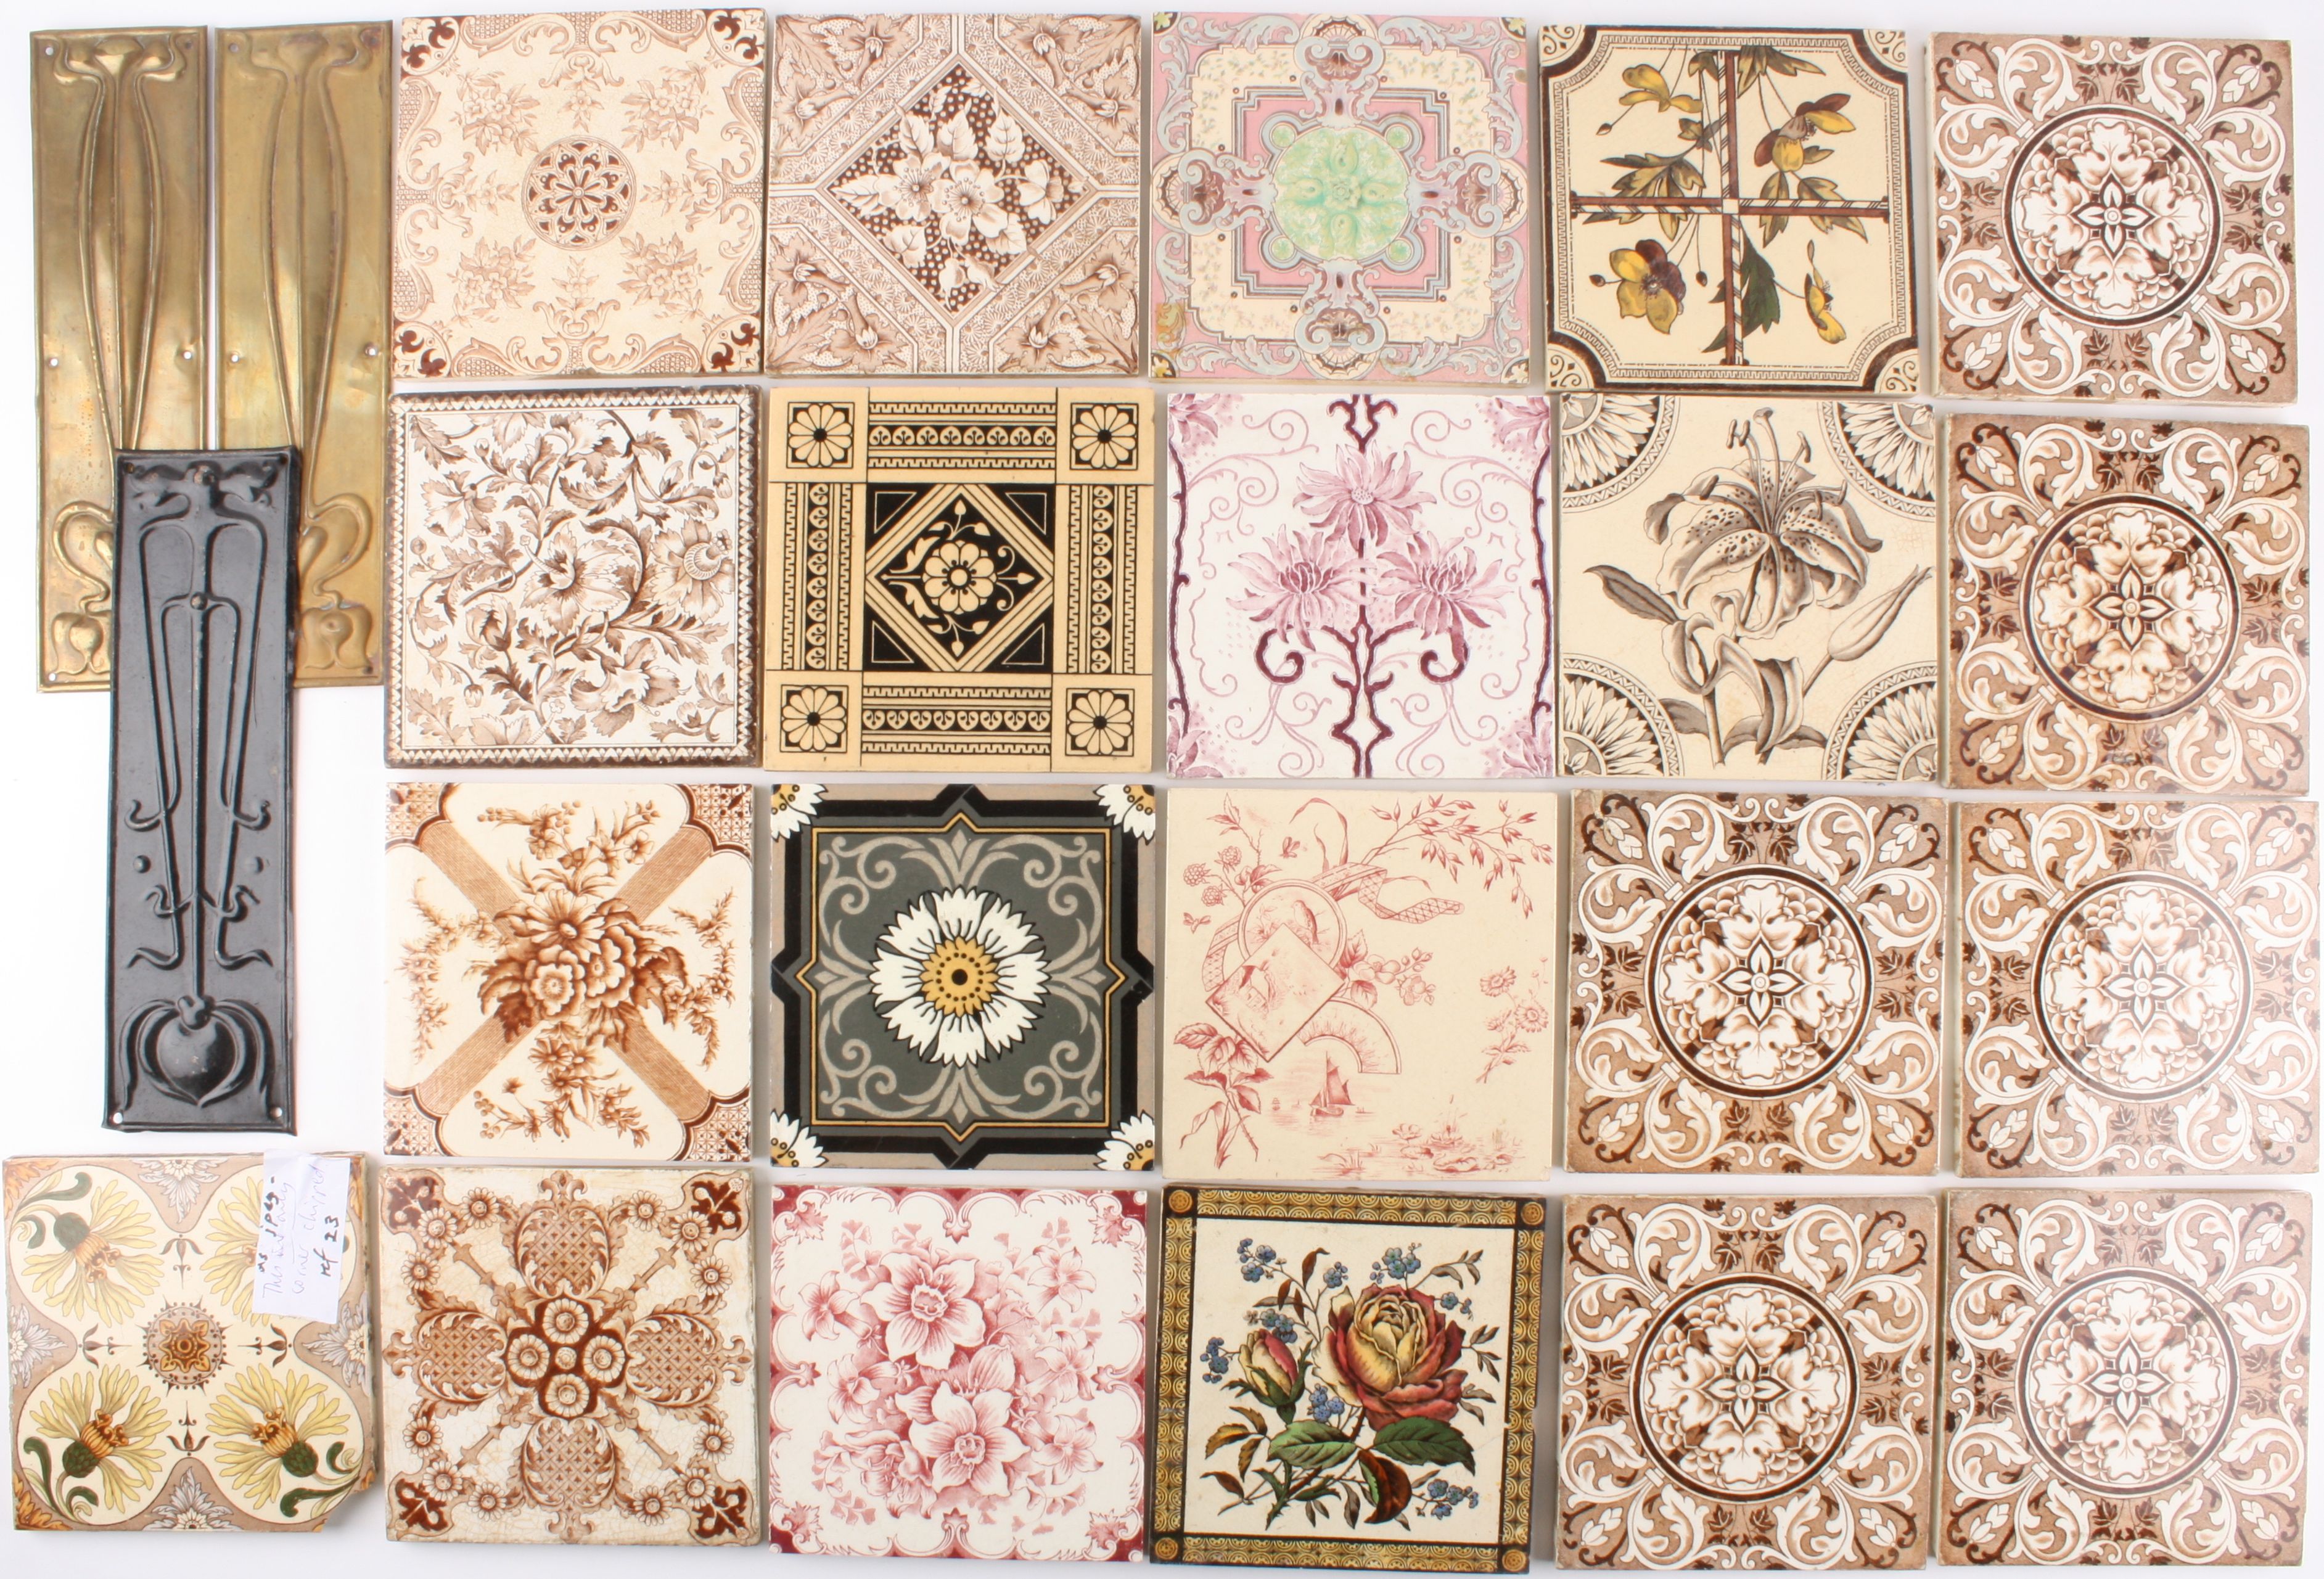 A collection of 21 Victorian transfer printed tiles
the square tiles of various typical designs